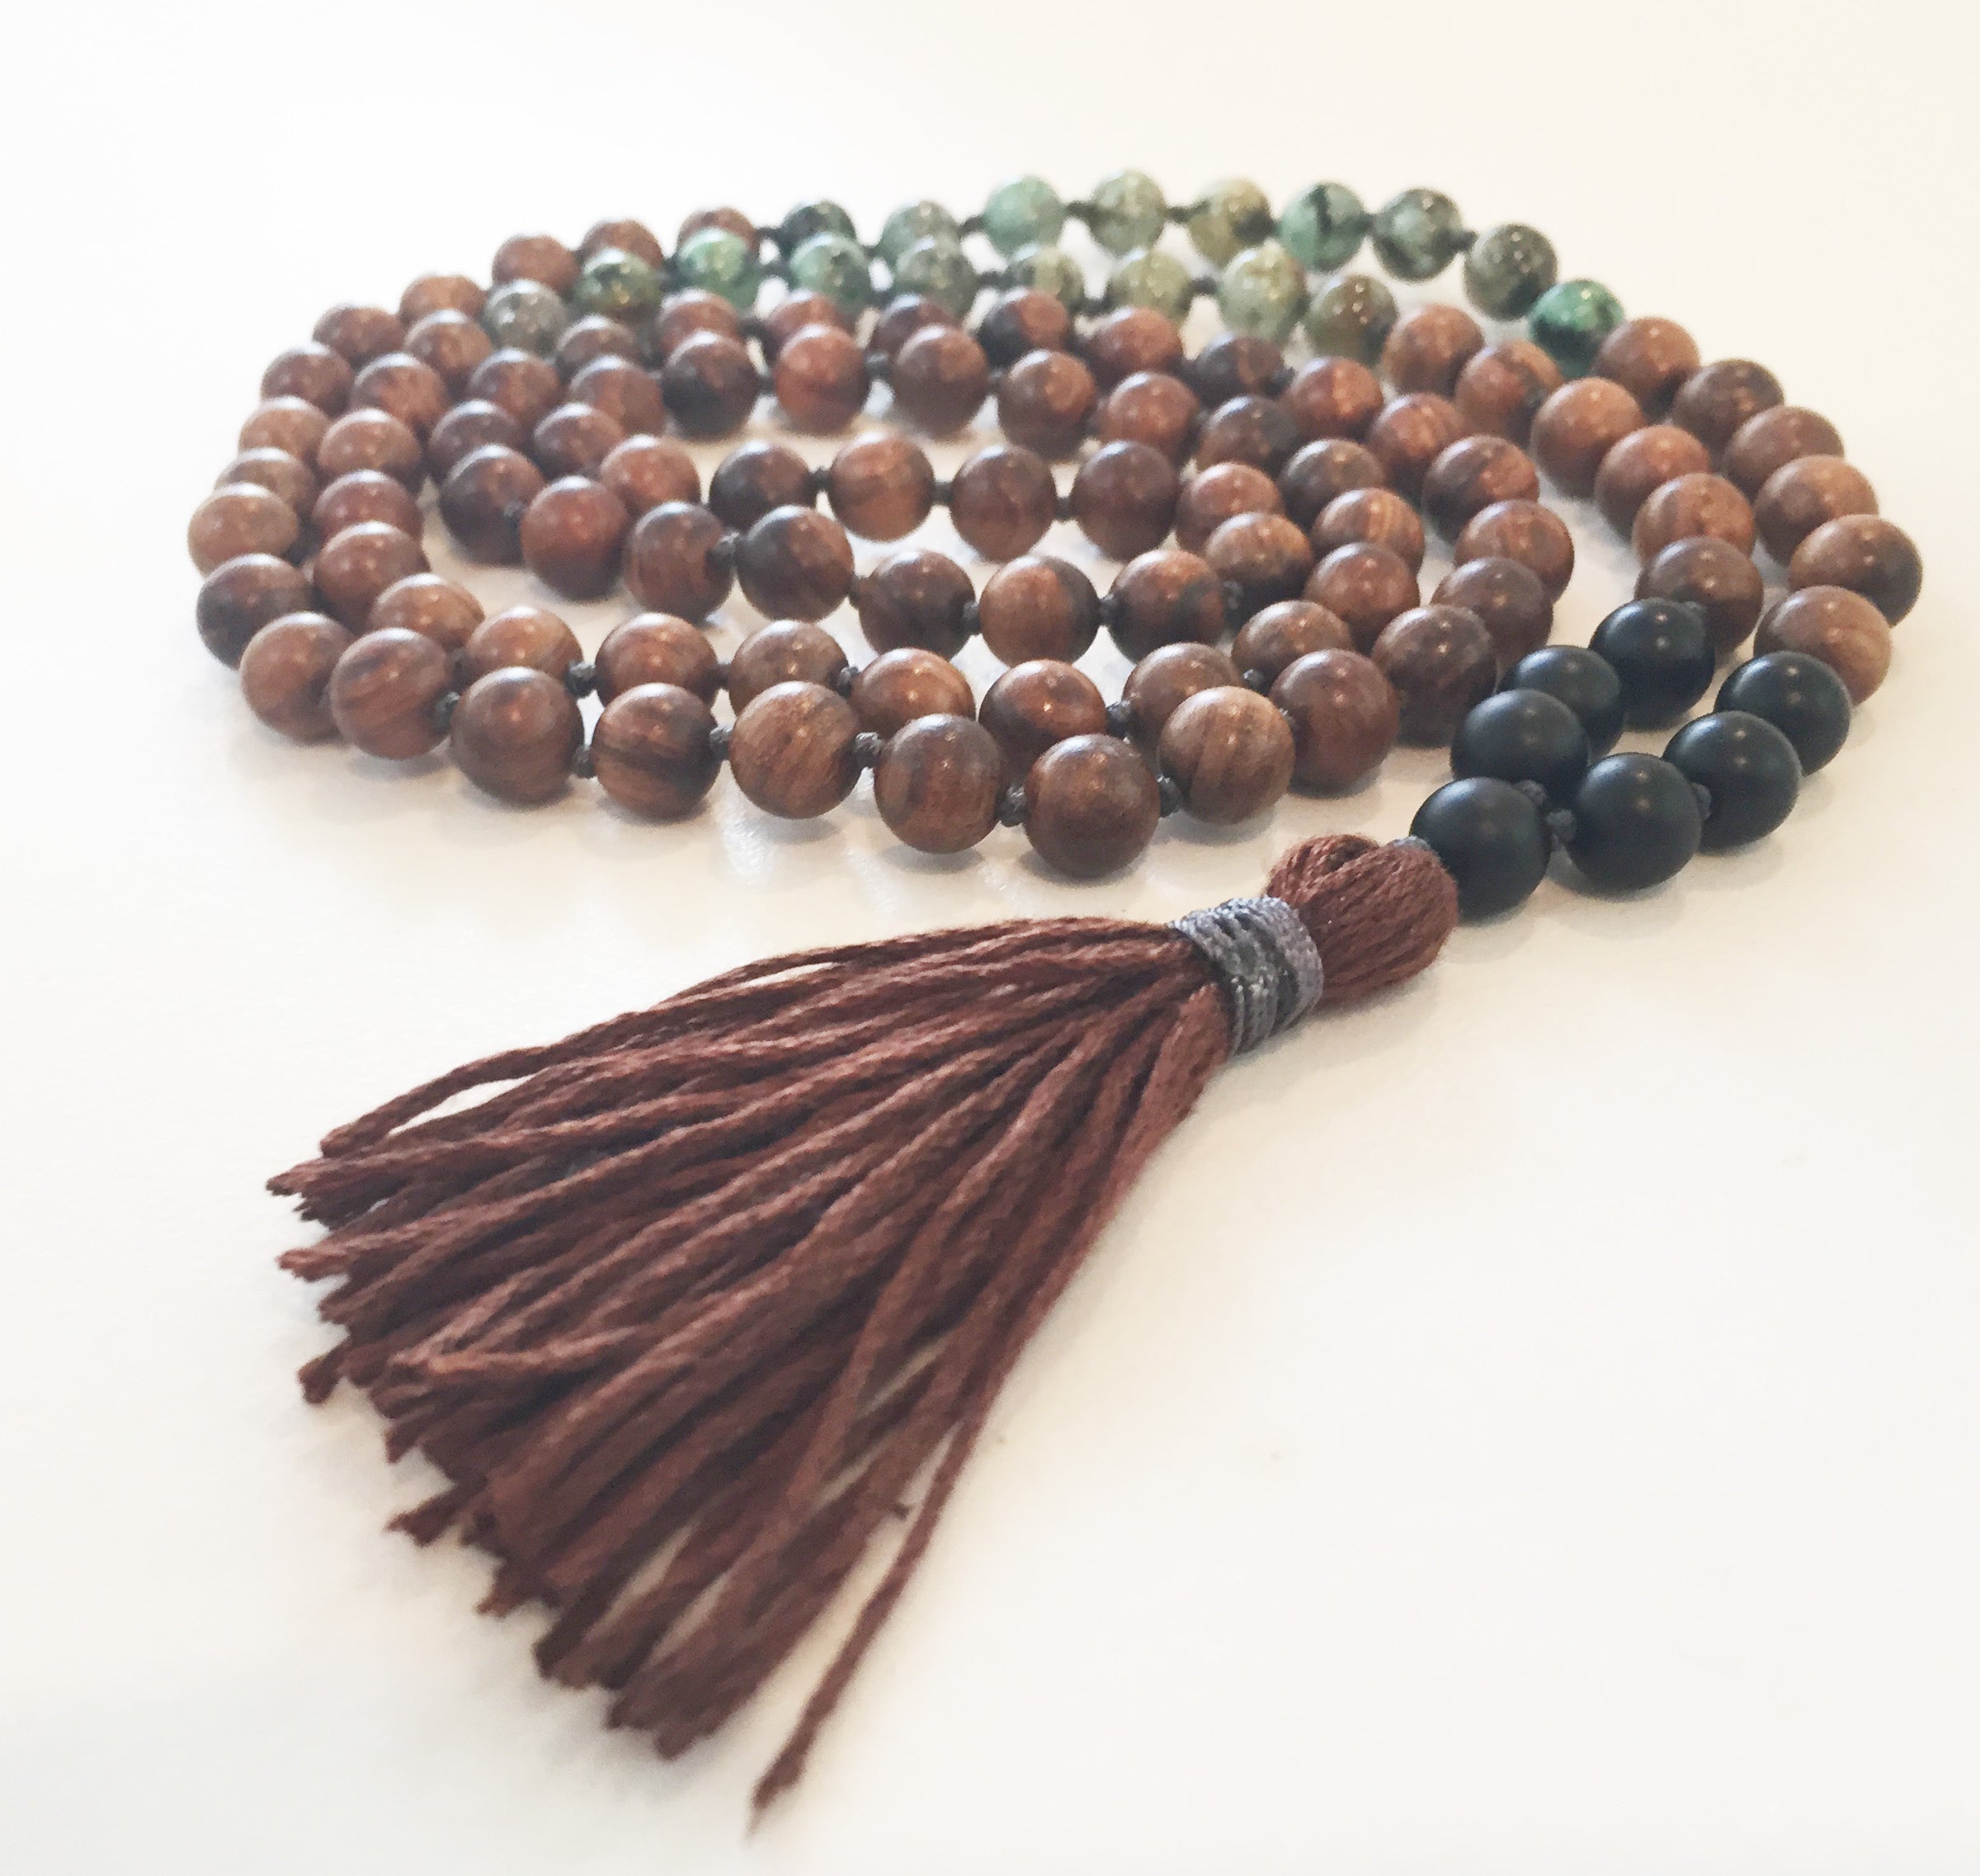 8mm Pear Wood & African Turquoise 108 Knotted Mala Necklace with Colored Tassel